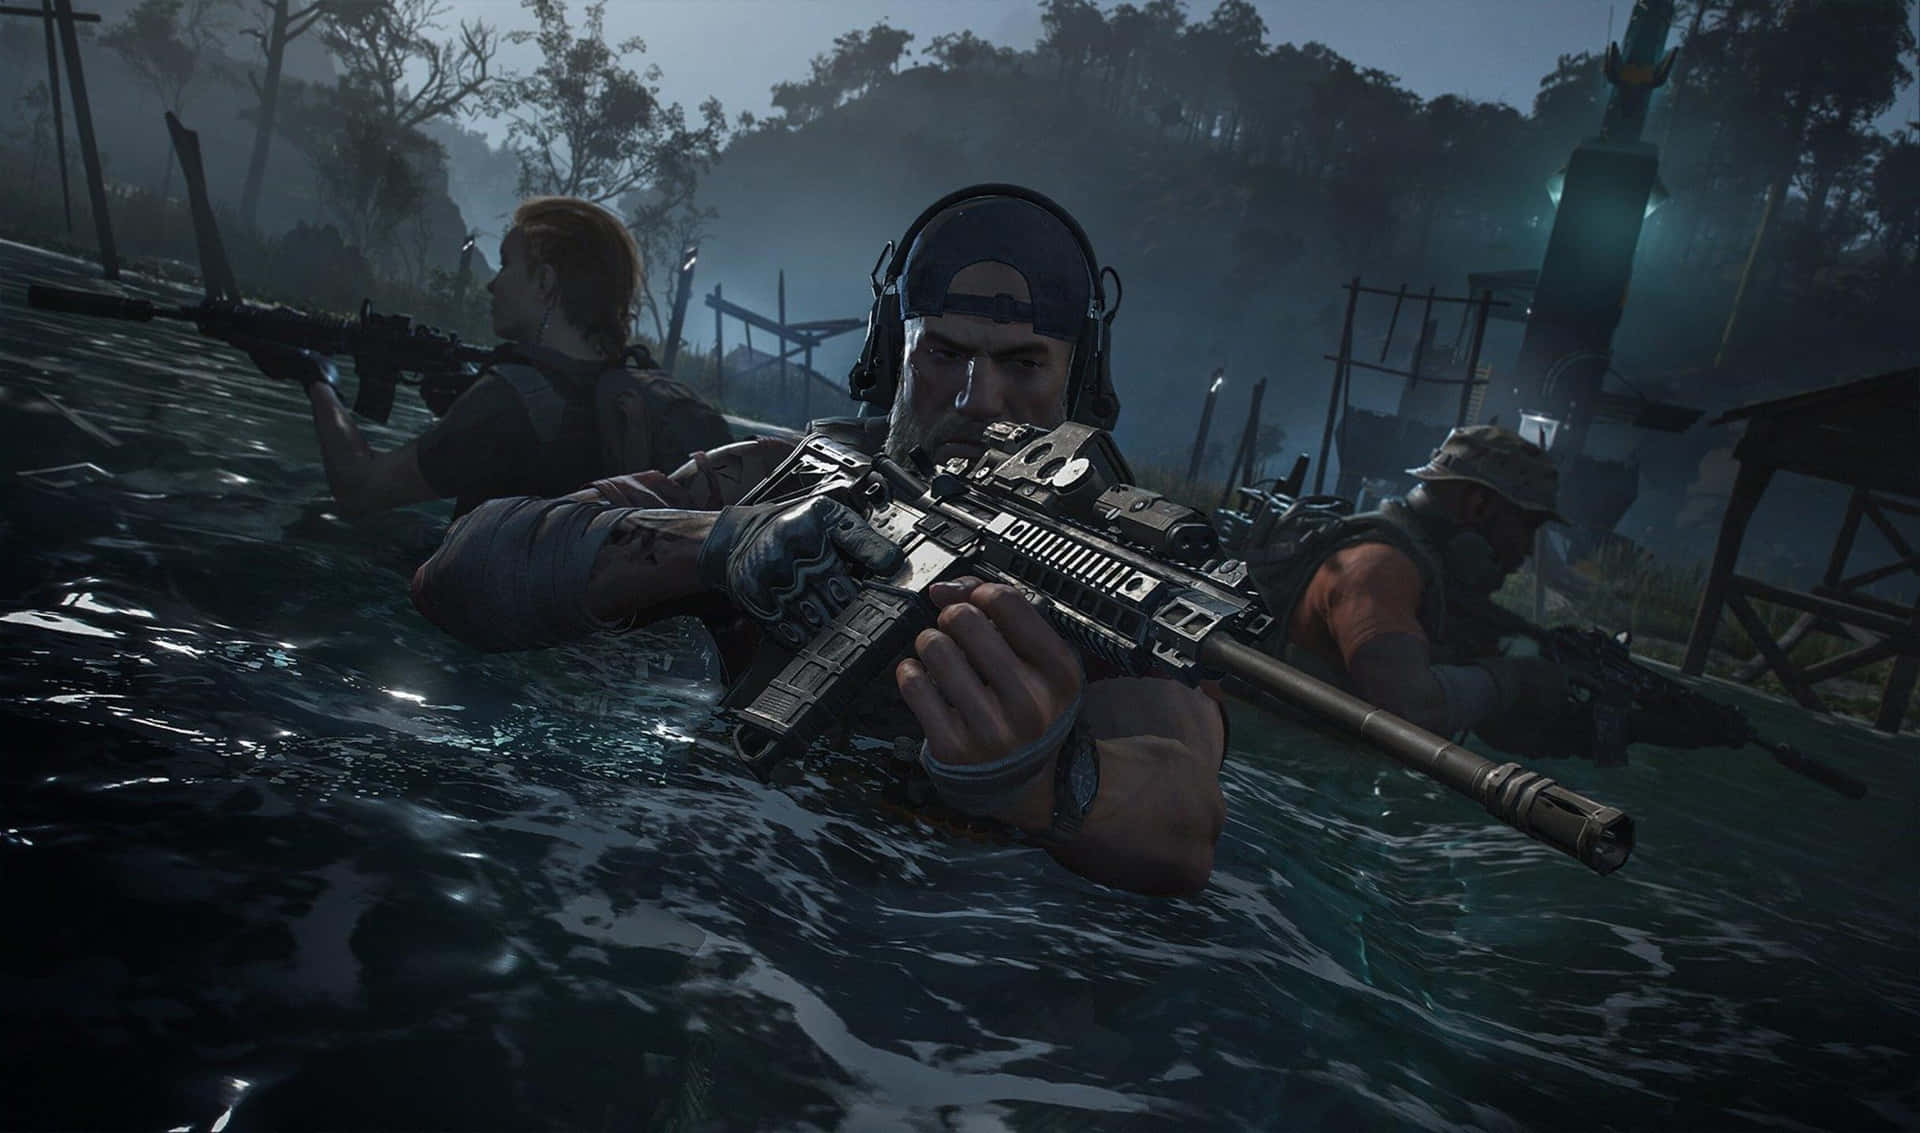 2440x1440 Ghost Recon Wildlands Squad Traveling Through Flooded Area Background